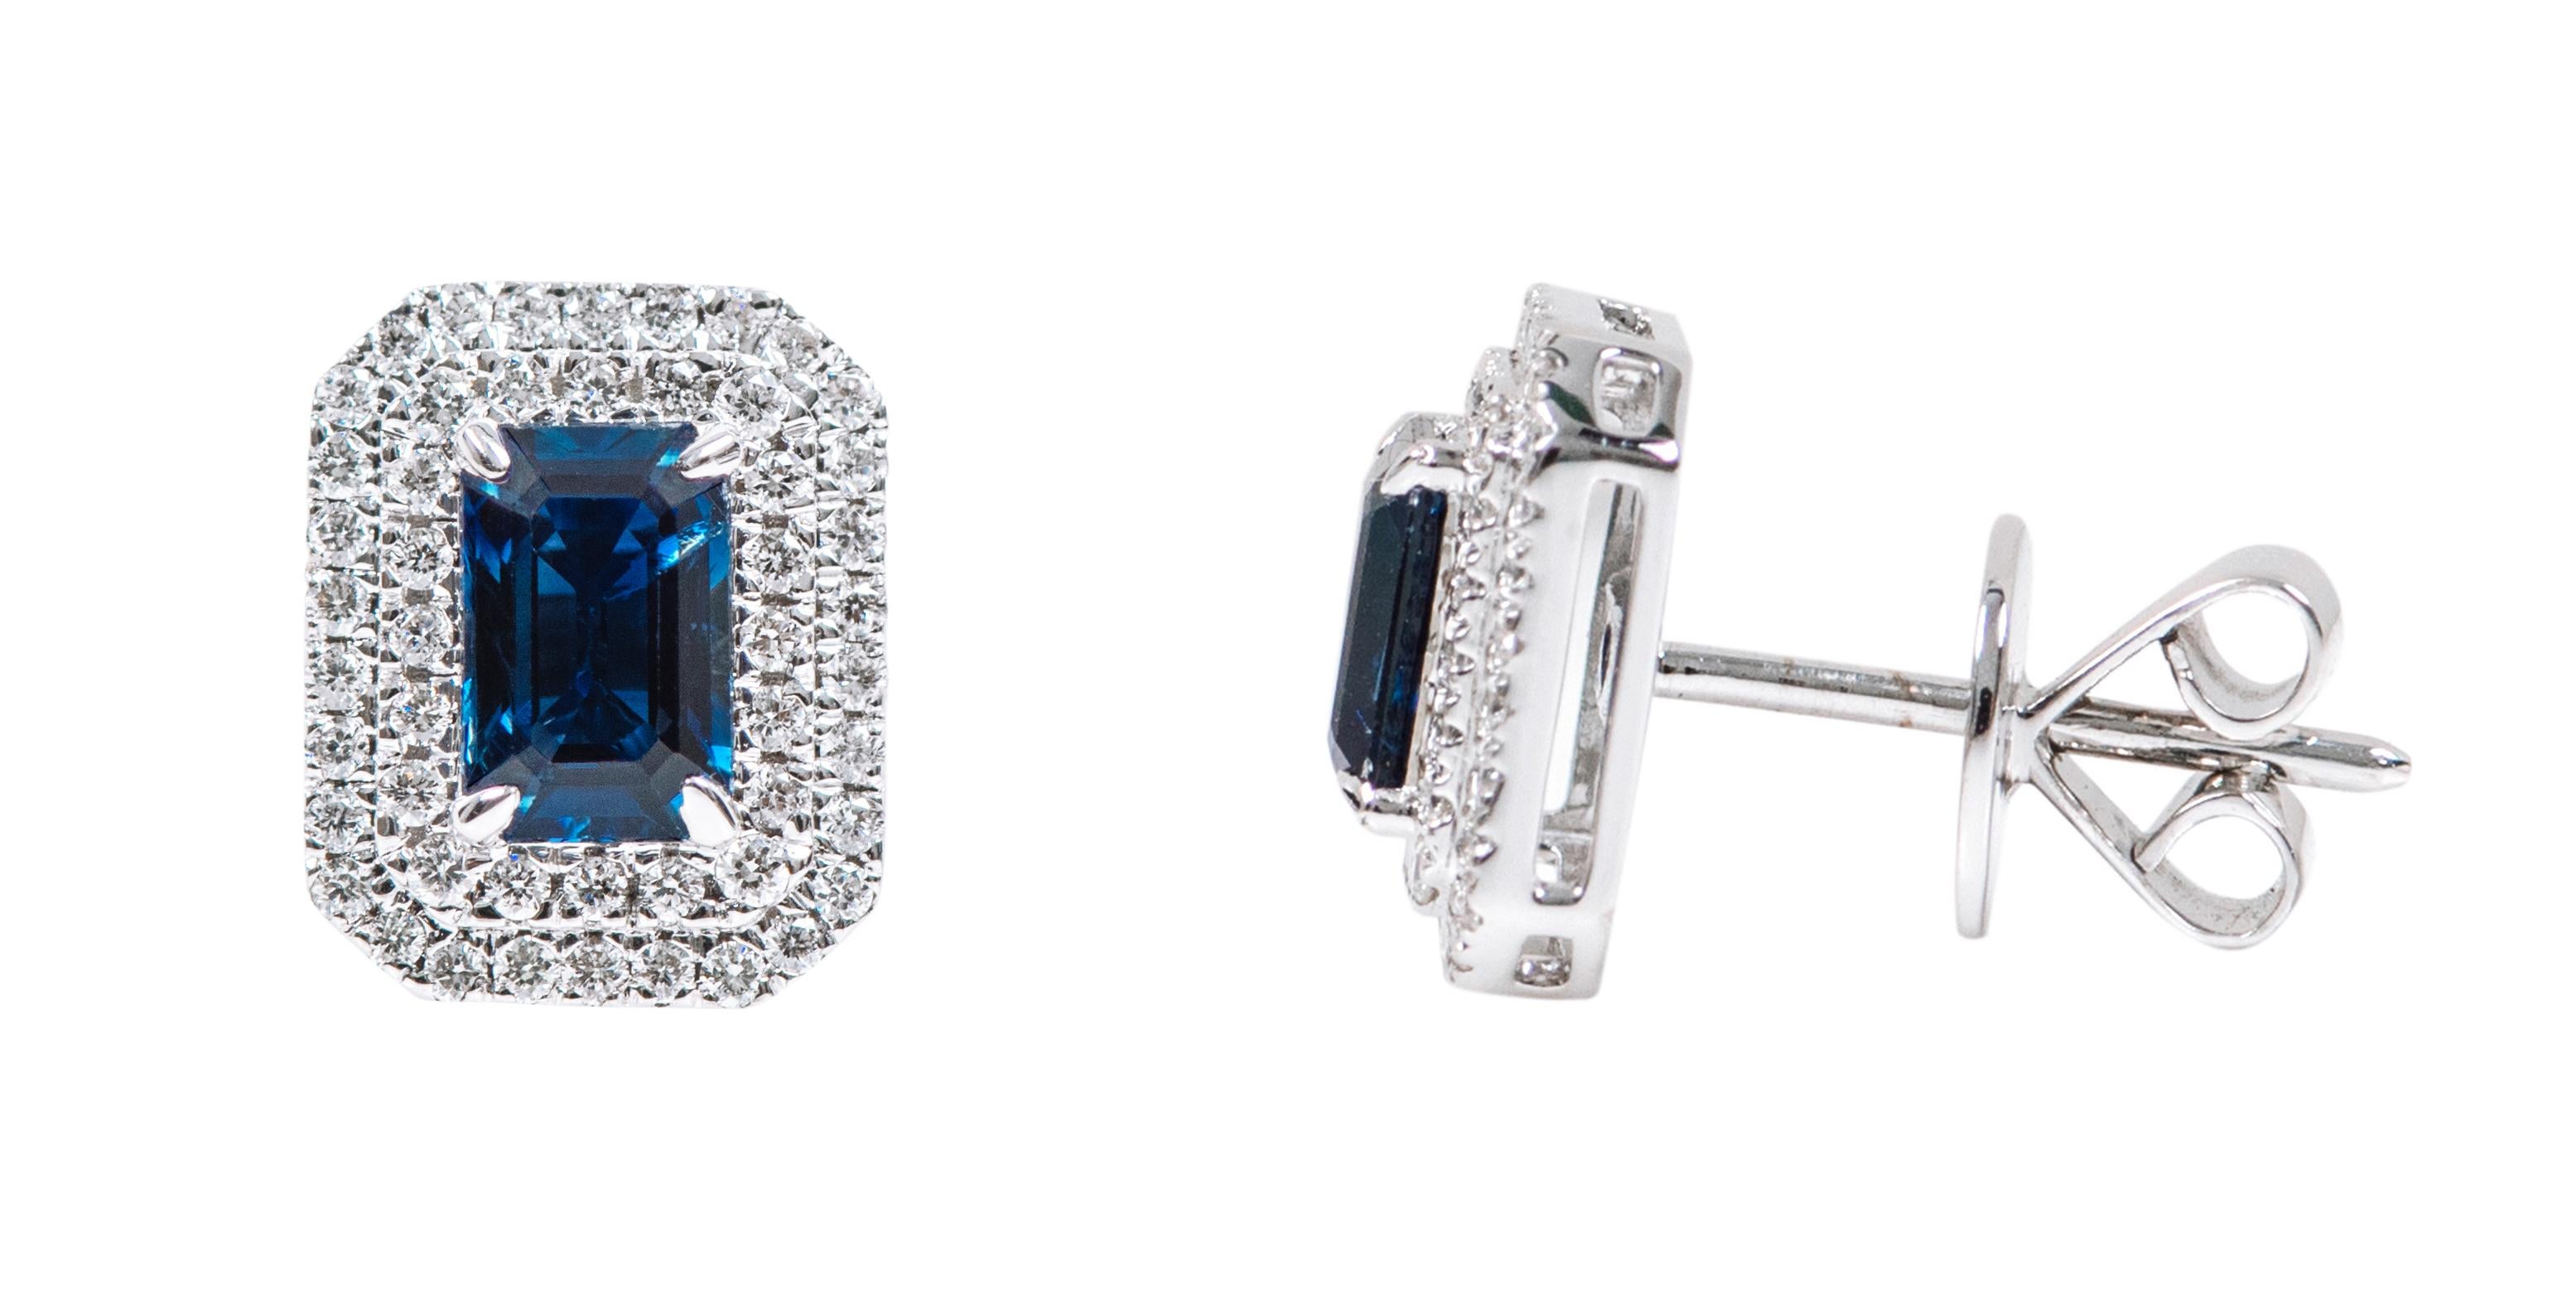 18 Karat White Gold 1.41 Carat Emerald-Cut Sapphire and Diamond Double Cluster Stud Earrings

This magnificent classy royal blue sapphire and diamond double cluster earring stud is mesmerizing. The vibrant emerald cut blue sapphire solitaire is